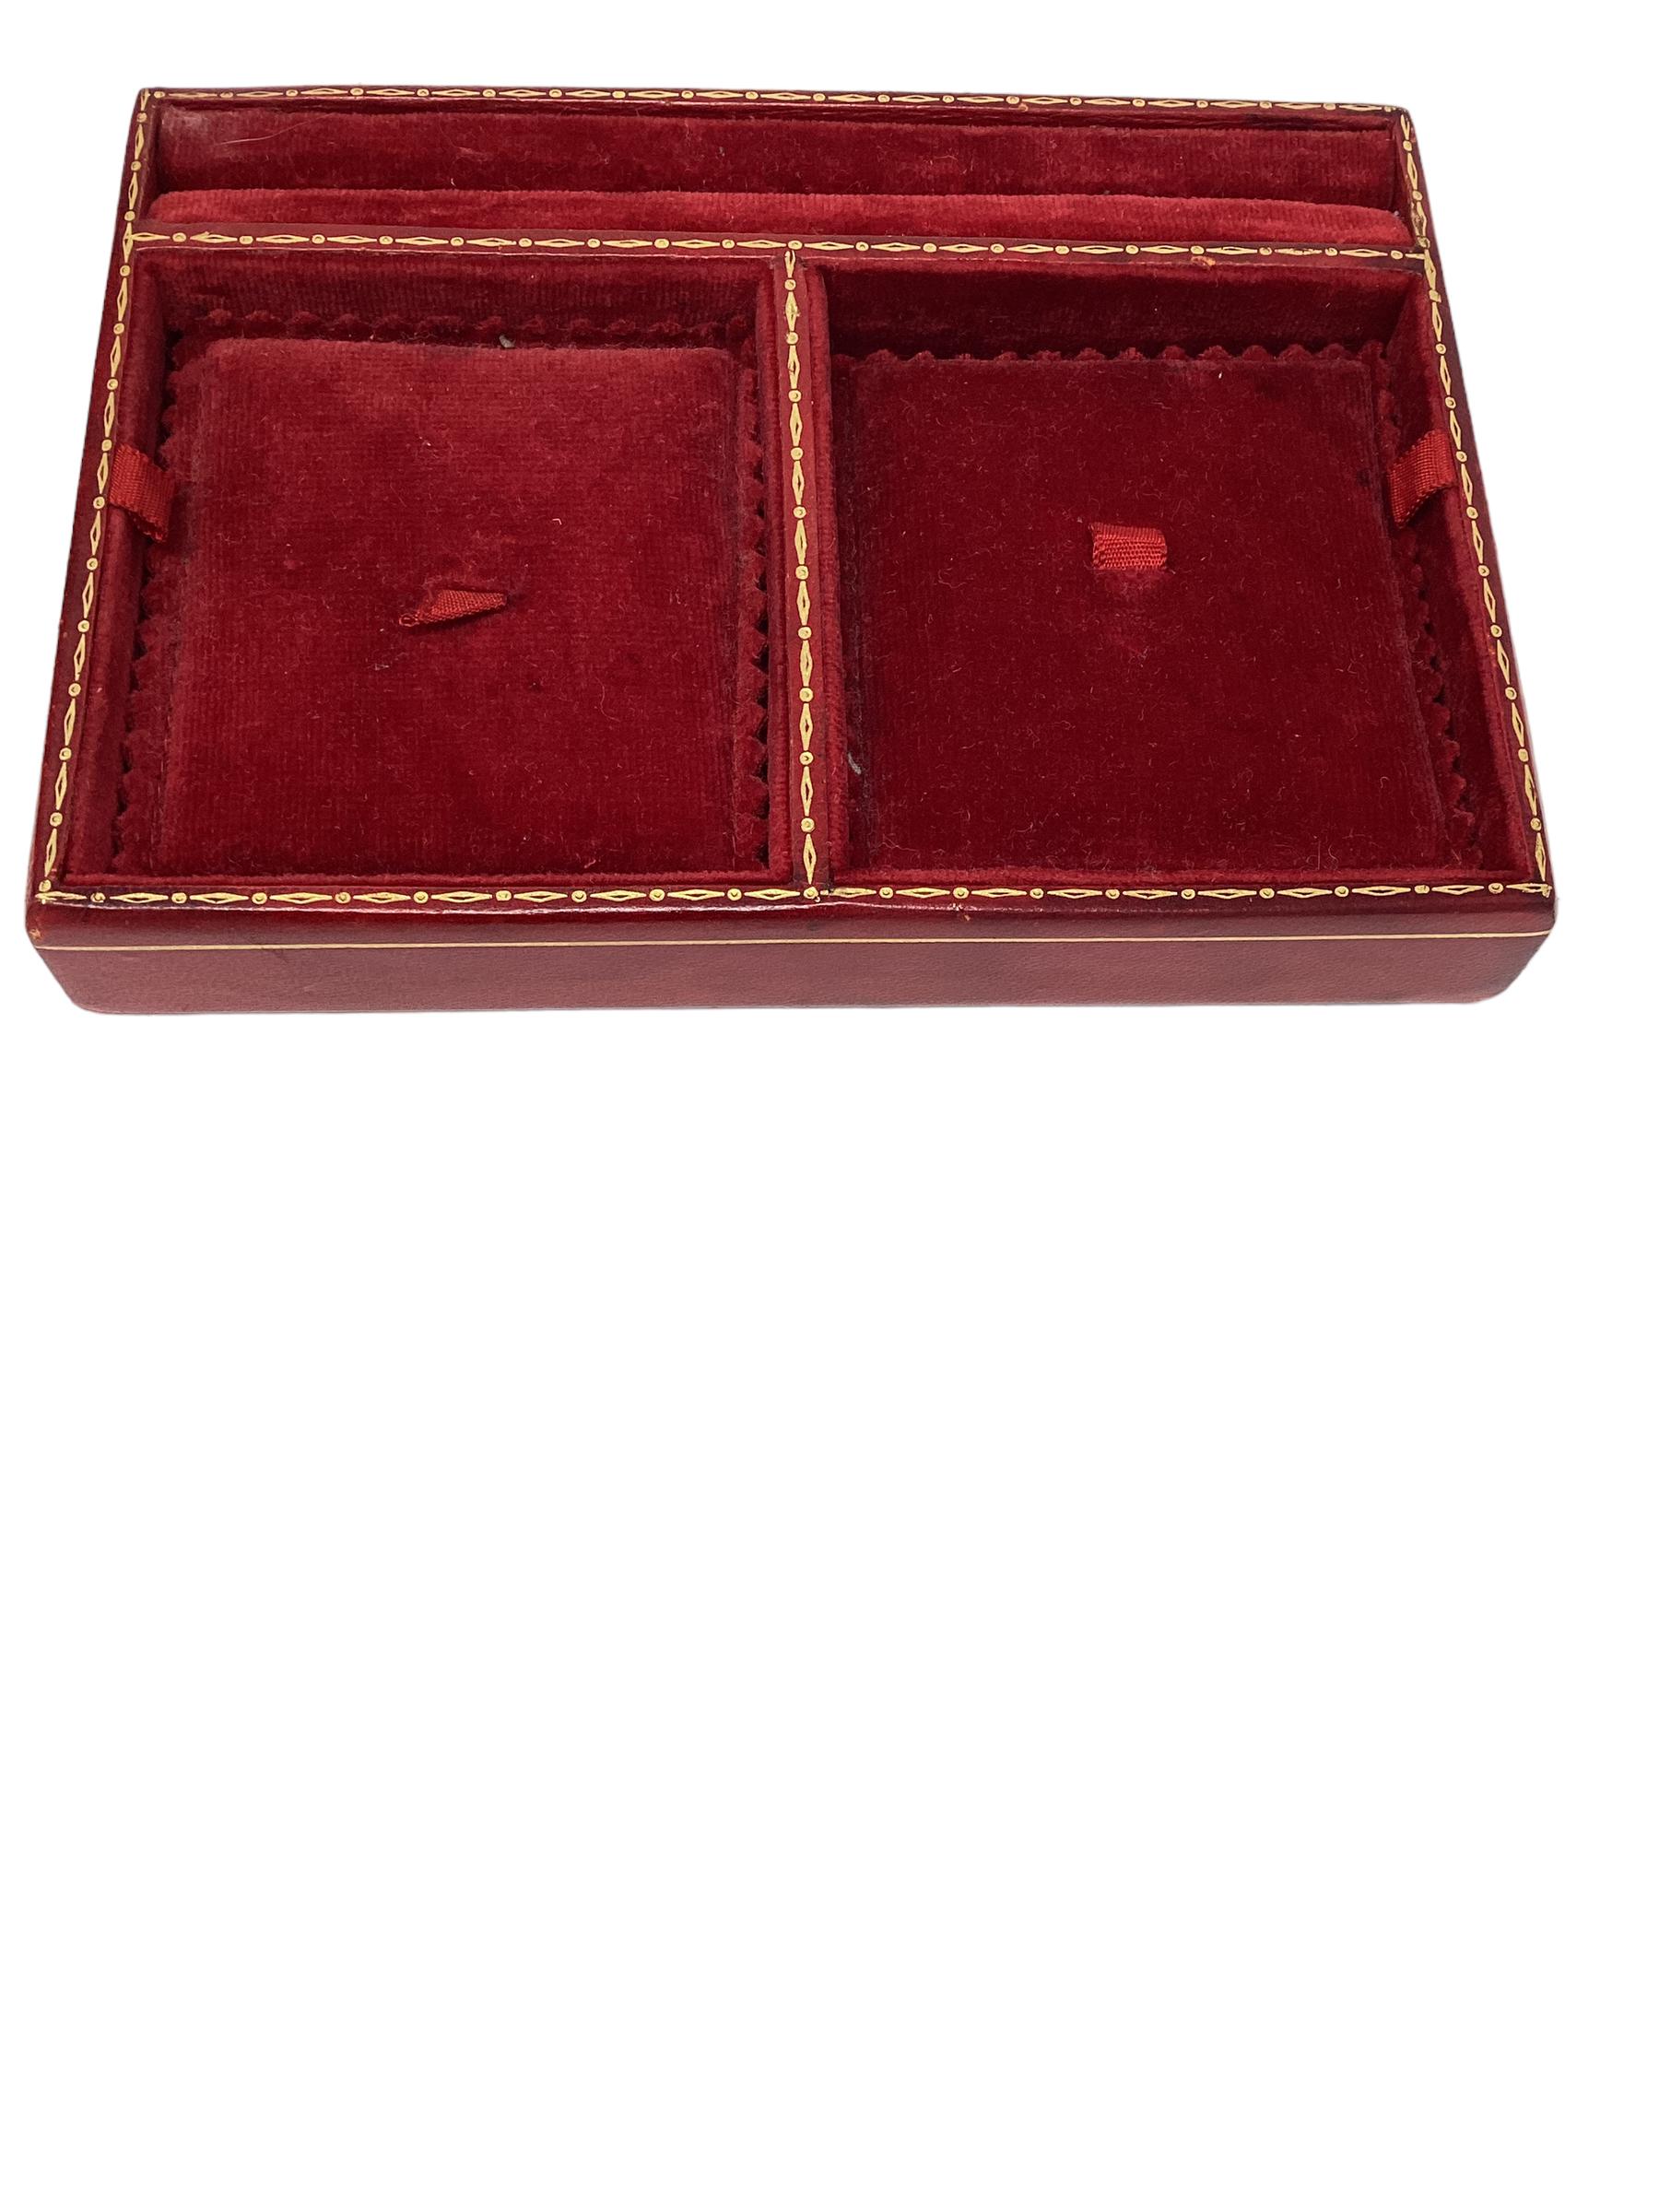 Italian Red Leather Jewelry Box with Gold Tooling  1